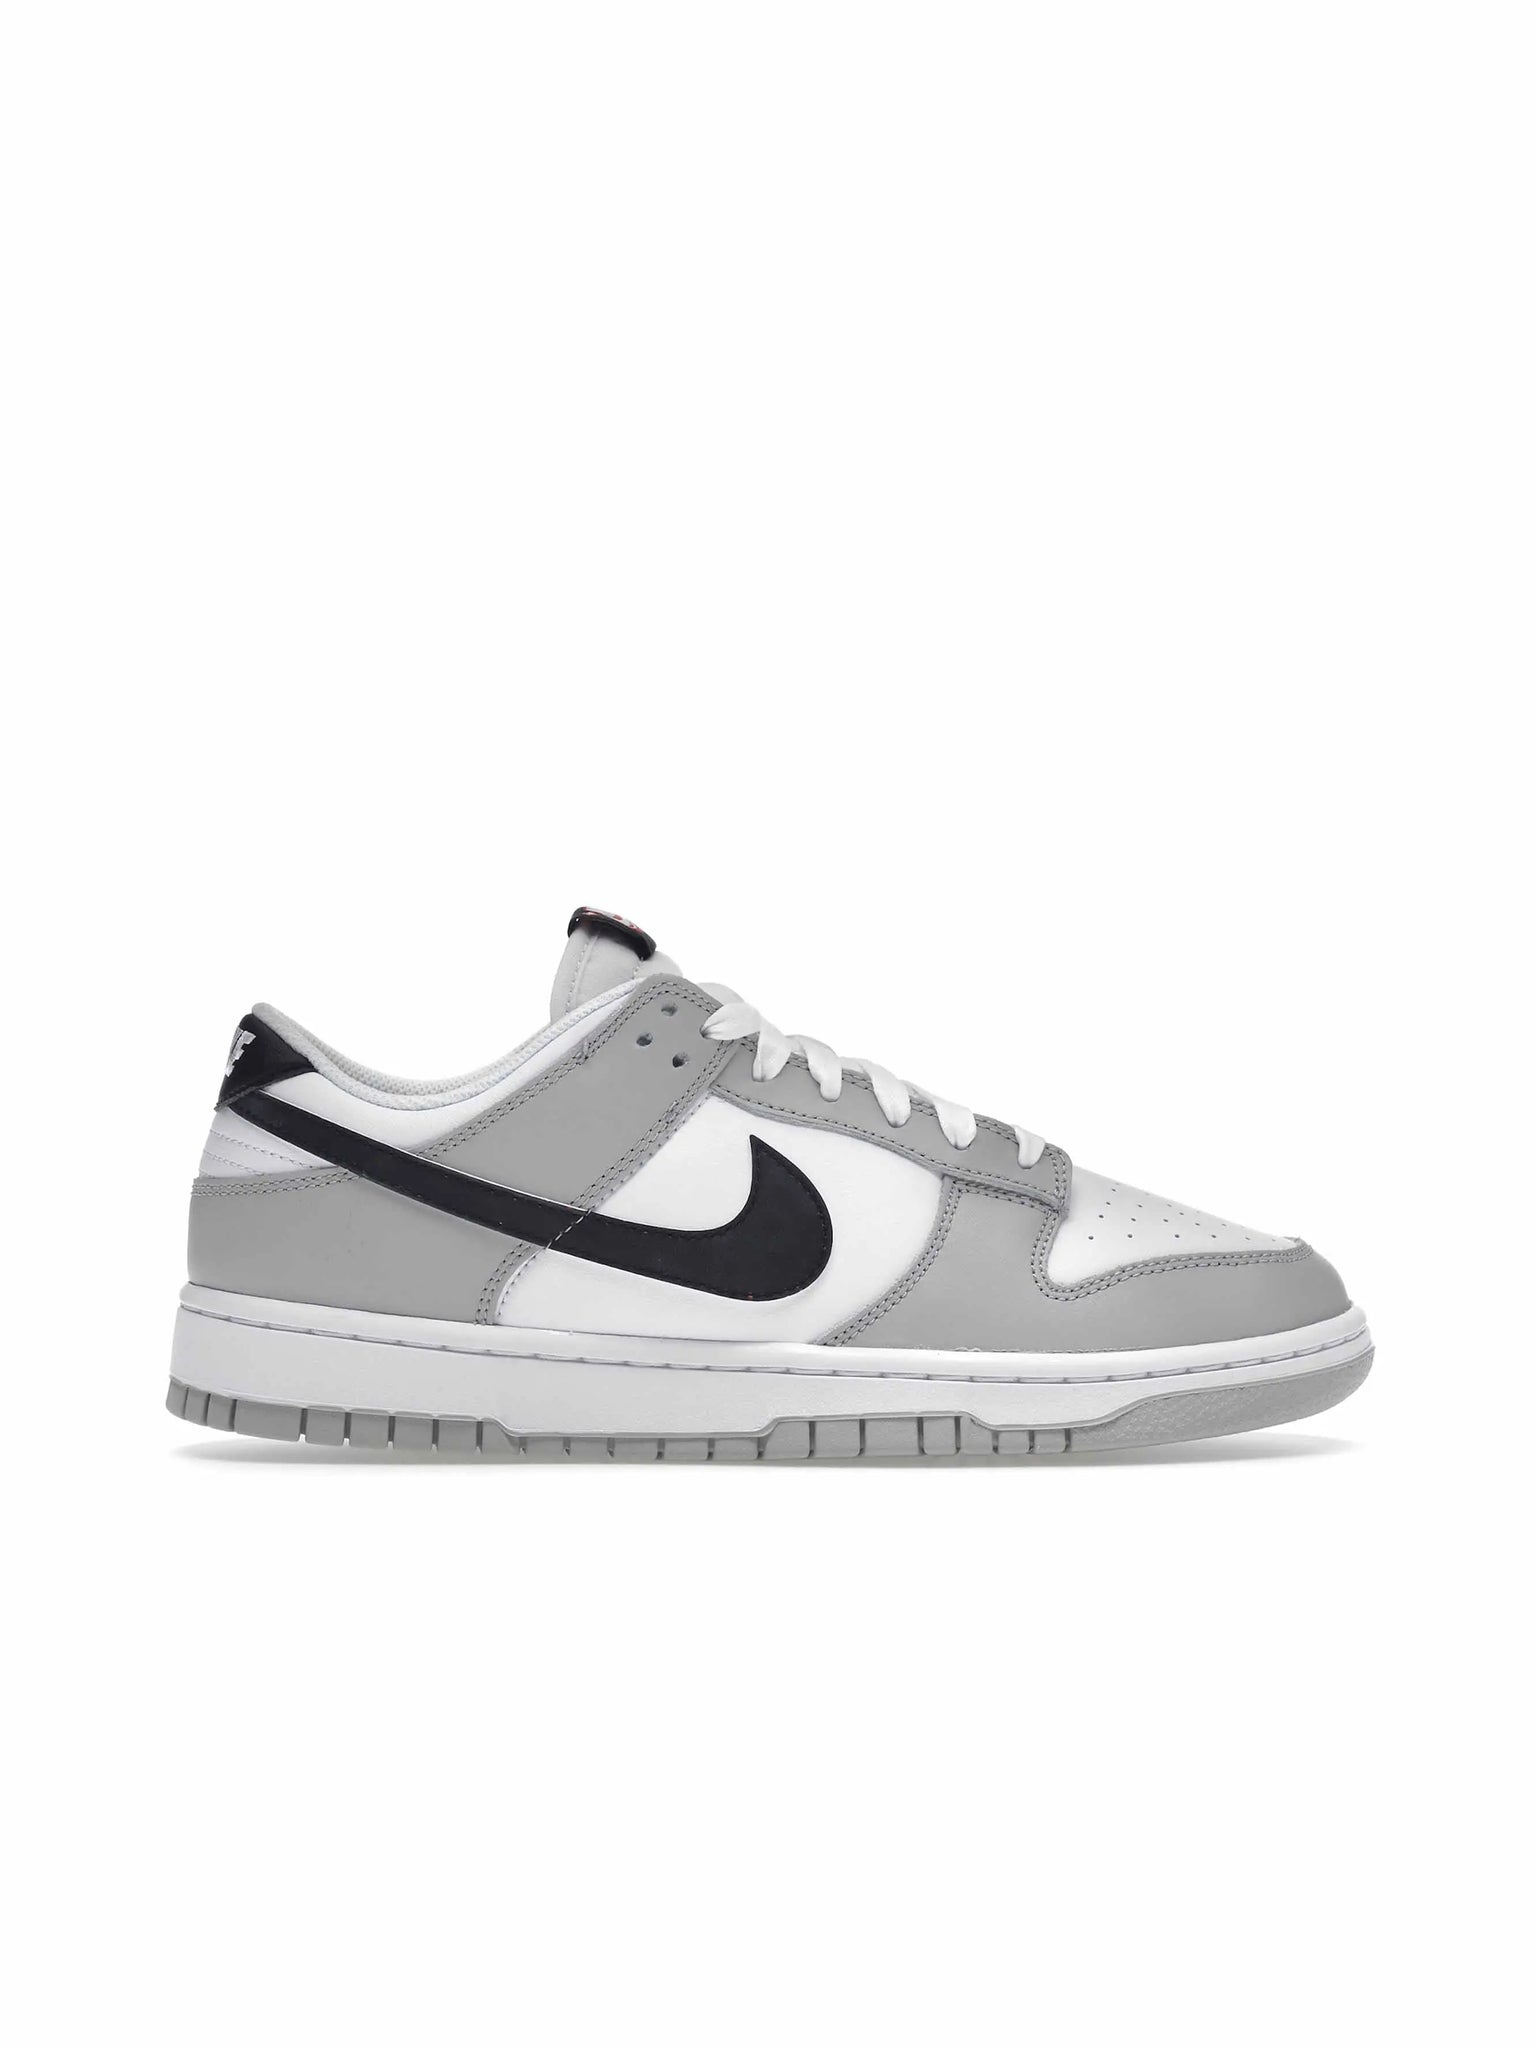 Nike Dunk Low SE Lottery Pack Grey Fog Prior